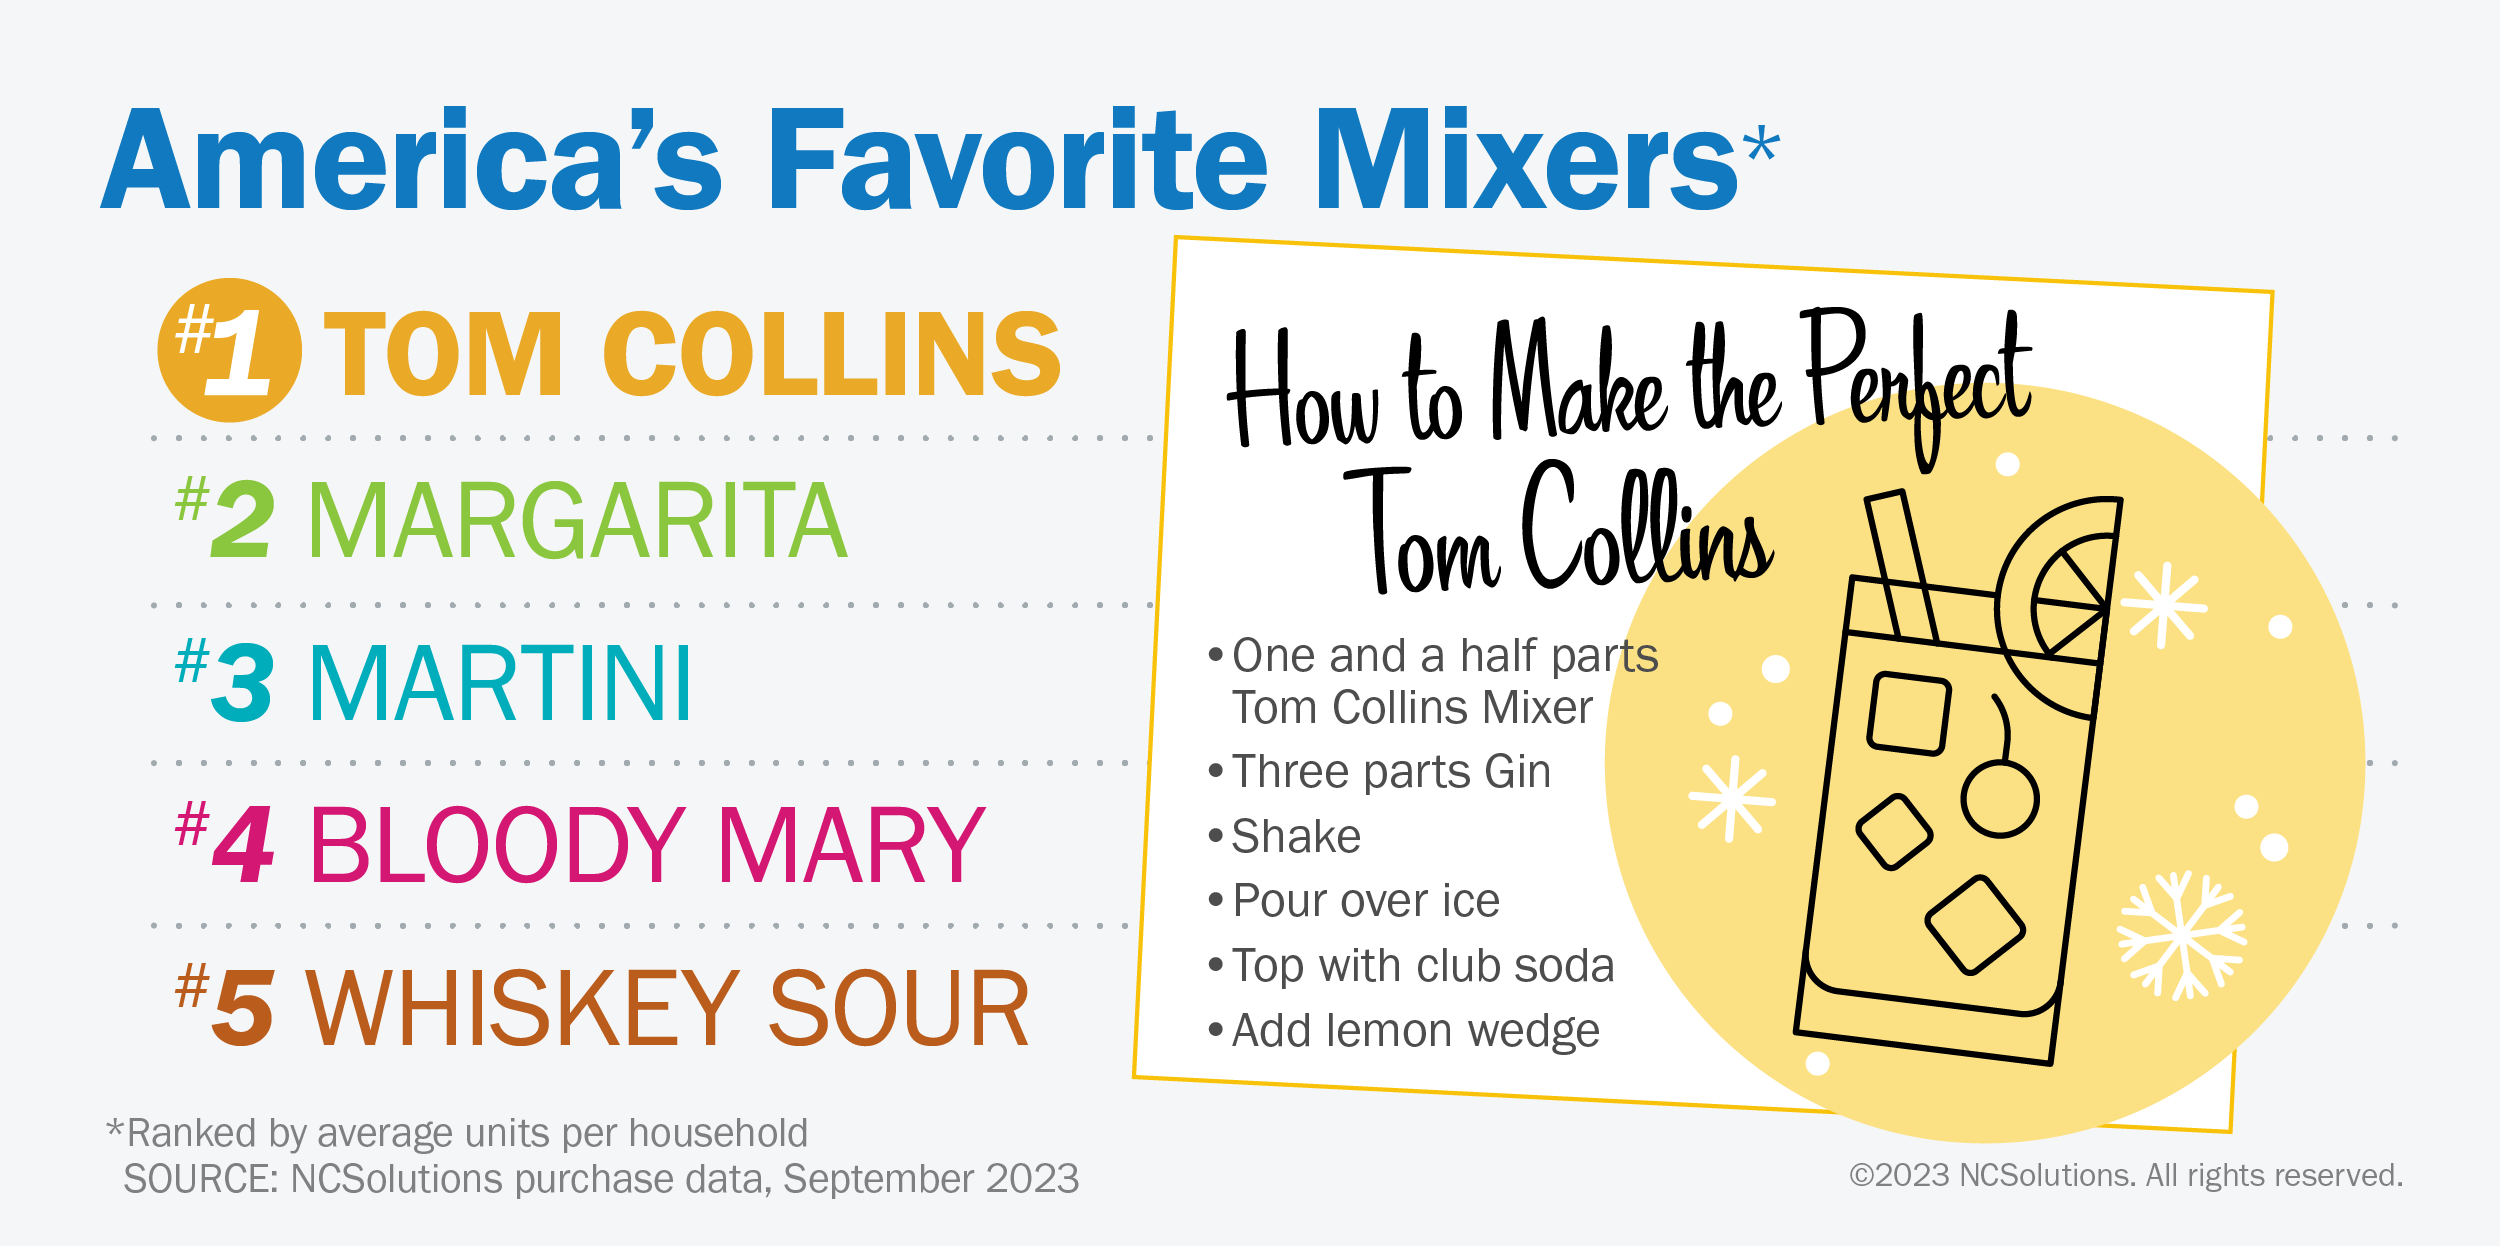 America’s favorite mixers are #1 Tom Collins, #2 Margarita, #3 Martini, #4 Bloody Mary, and #5 Whiskey Sour, followed by a recipe for a Tom Collins